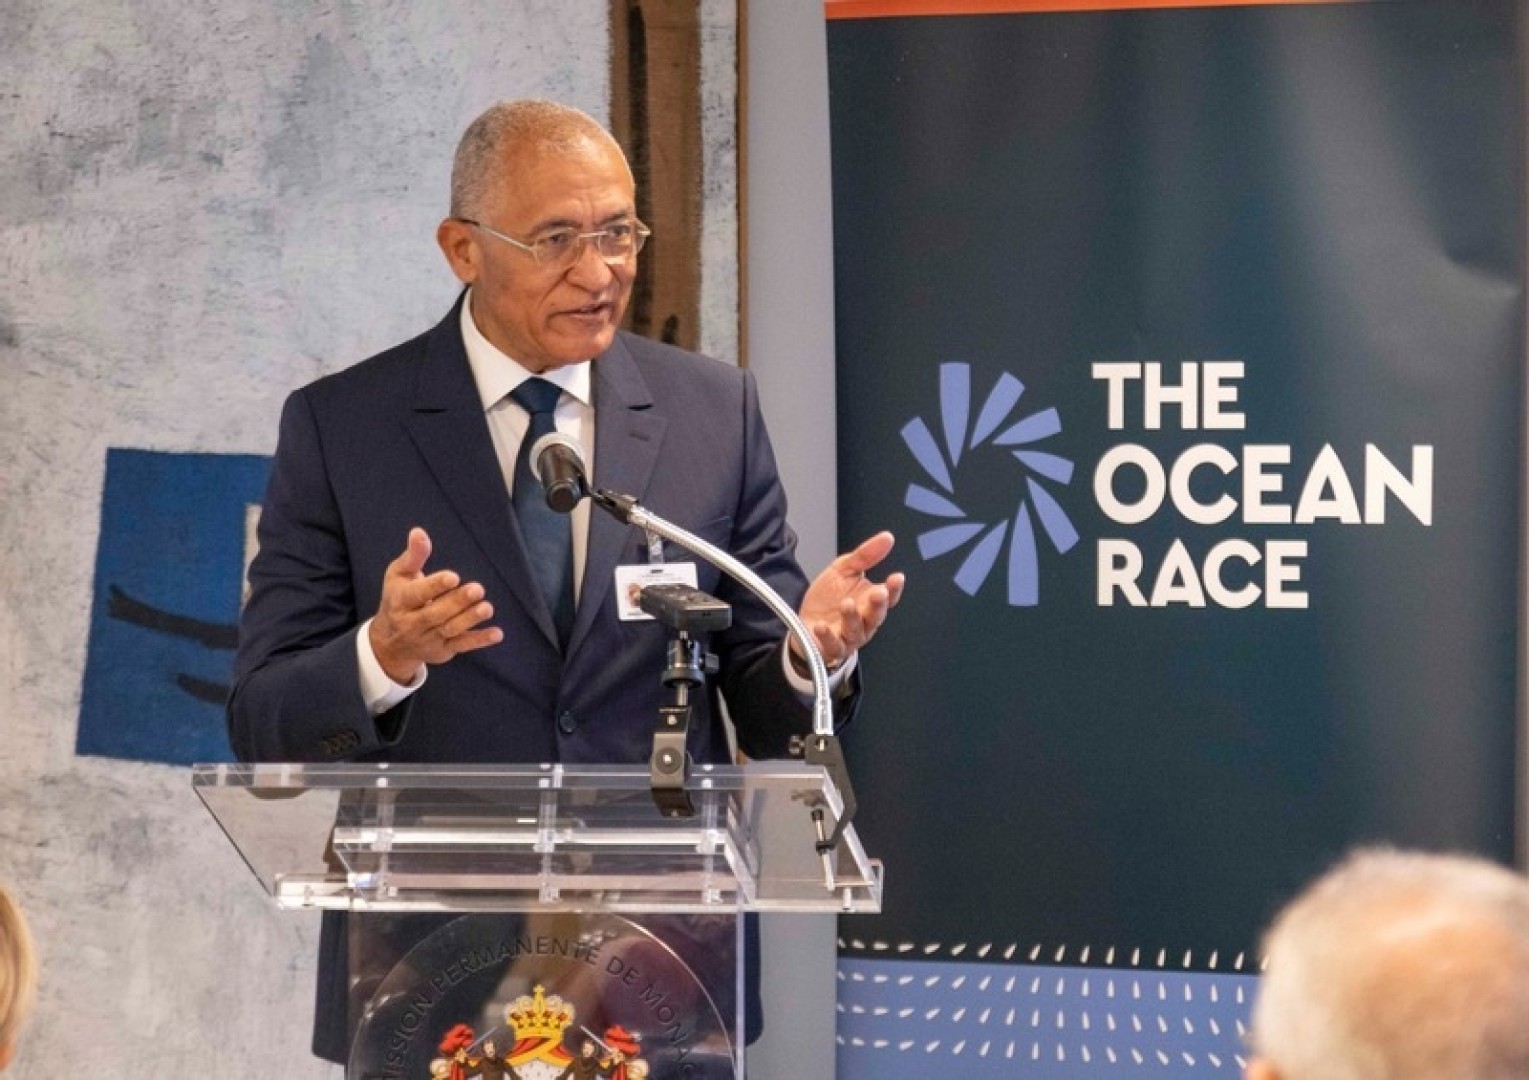 Cabo Verde´s Minister of Foreign Affairs, Cooperation and Regional Integration, Rui Alberto de Figueiredo Soares speaking at a high-level round table event hosted by The Ocean Race in New York 22 Sept 2022
© Cherie Bridges / The Ocean Race